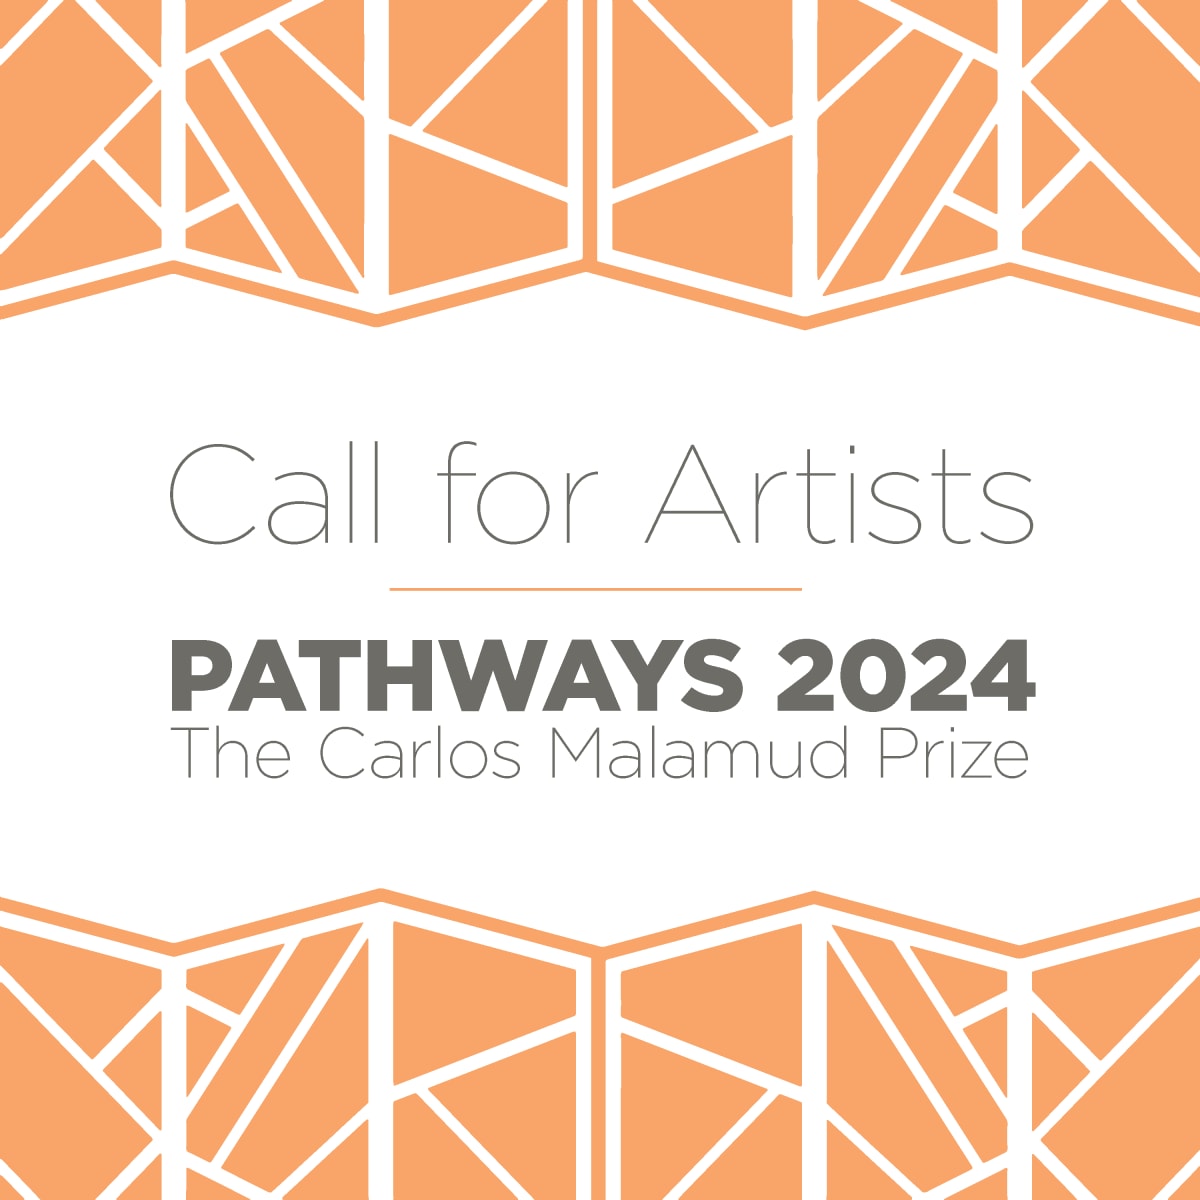 Pathways 2024: The Carlos Malamud Prize Call for Artists